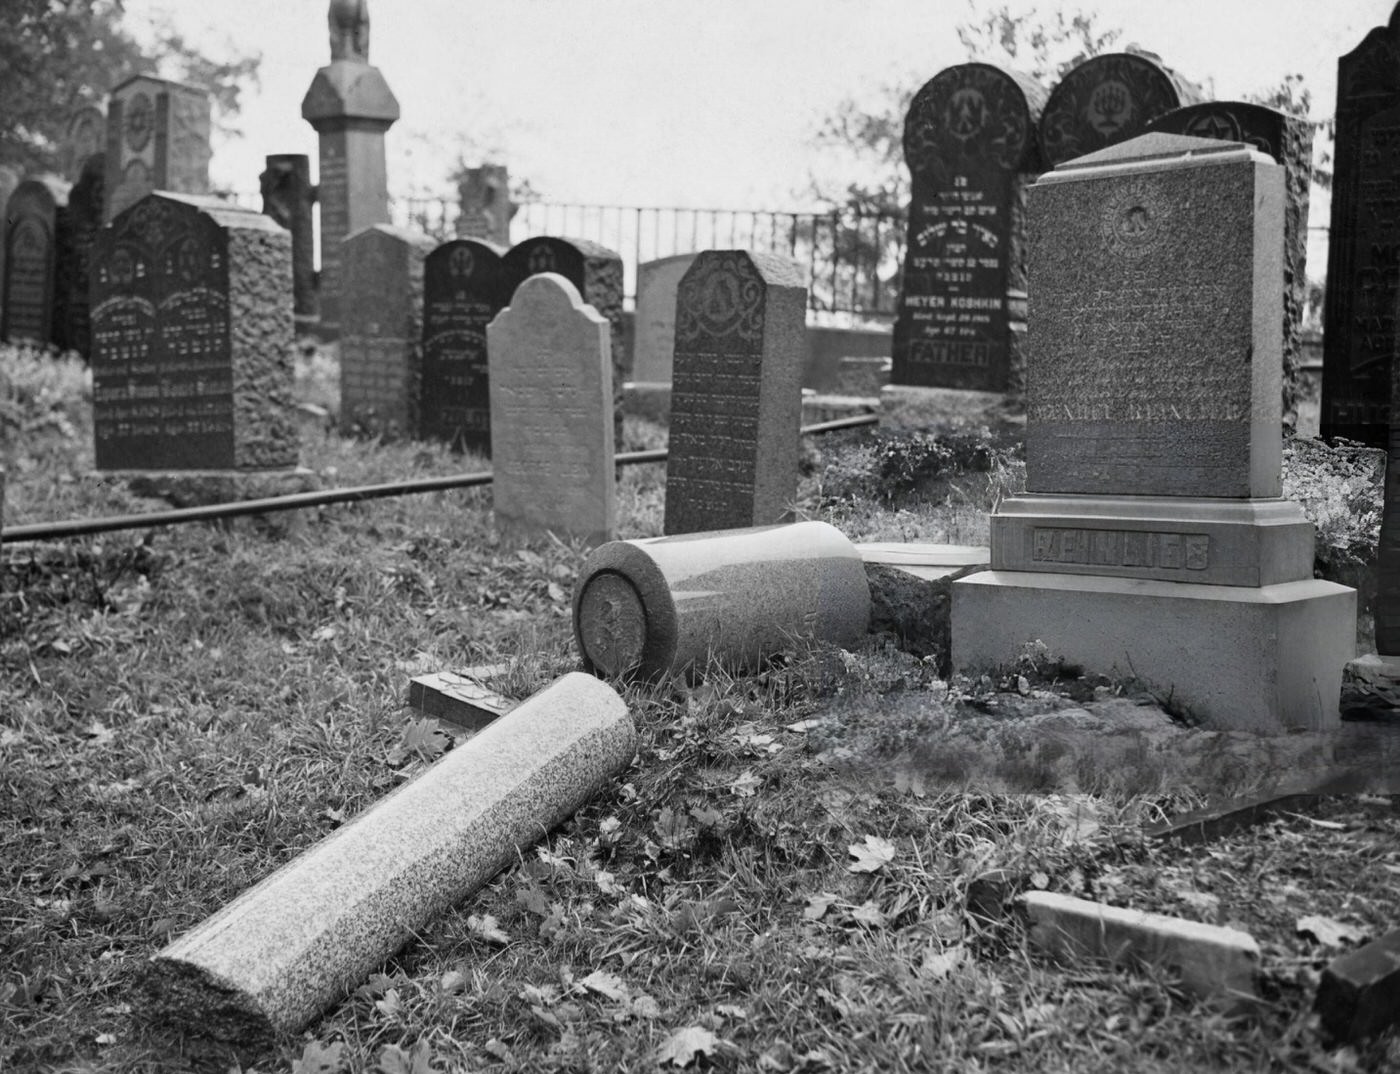 Desecration Of Tombstones At Mount Carmel Cemetery, A Jewish Cemetery In Queens, New York City, 1950S.